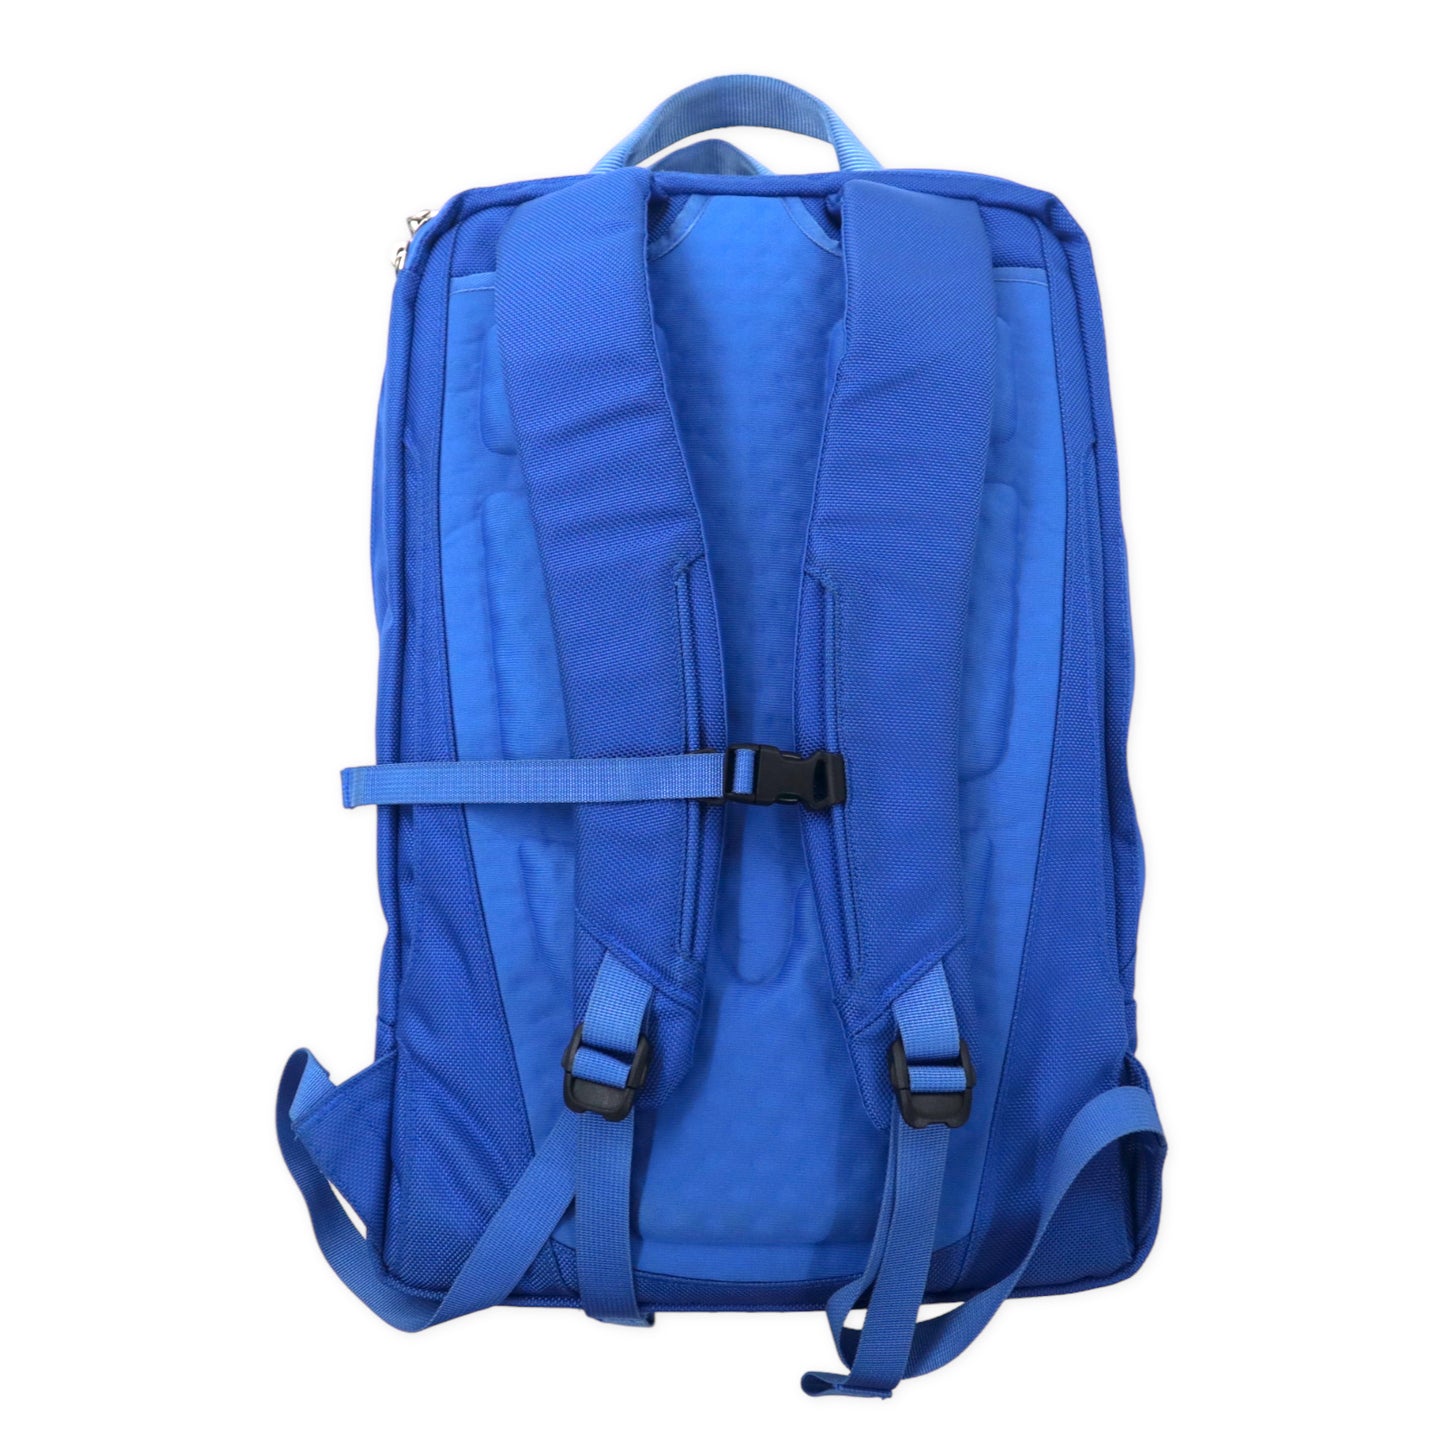 THE NORTH FACE Shuttle Day Pack Backpack Briefcase 20L Blue Nylon PC Sleeve  Shuttle Daypack NM81212